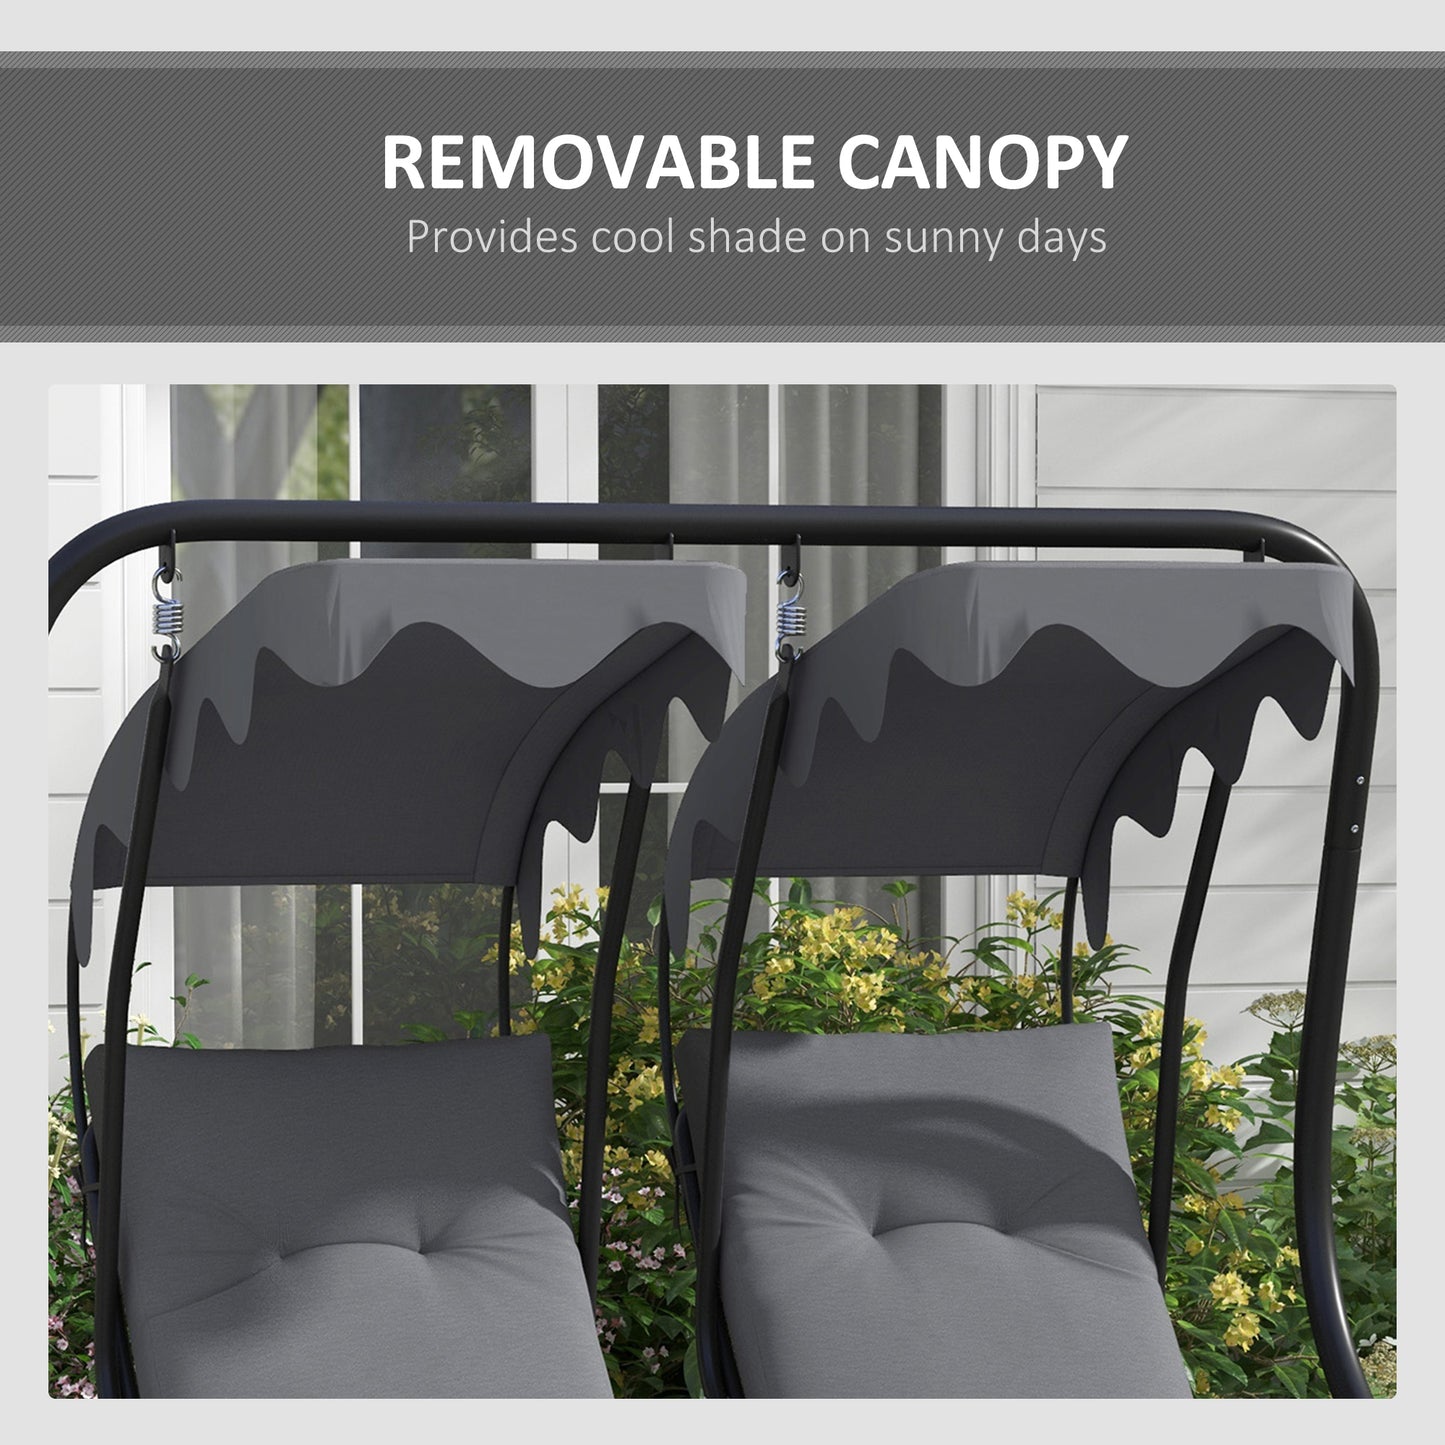 Outsunny Two-Seat Garden Swing Chair, with Protective Canopy - Grey